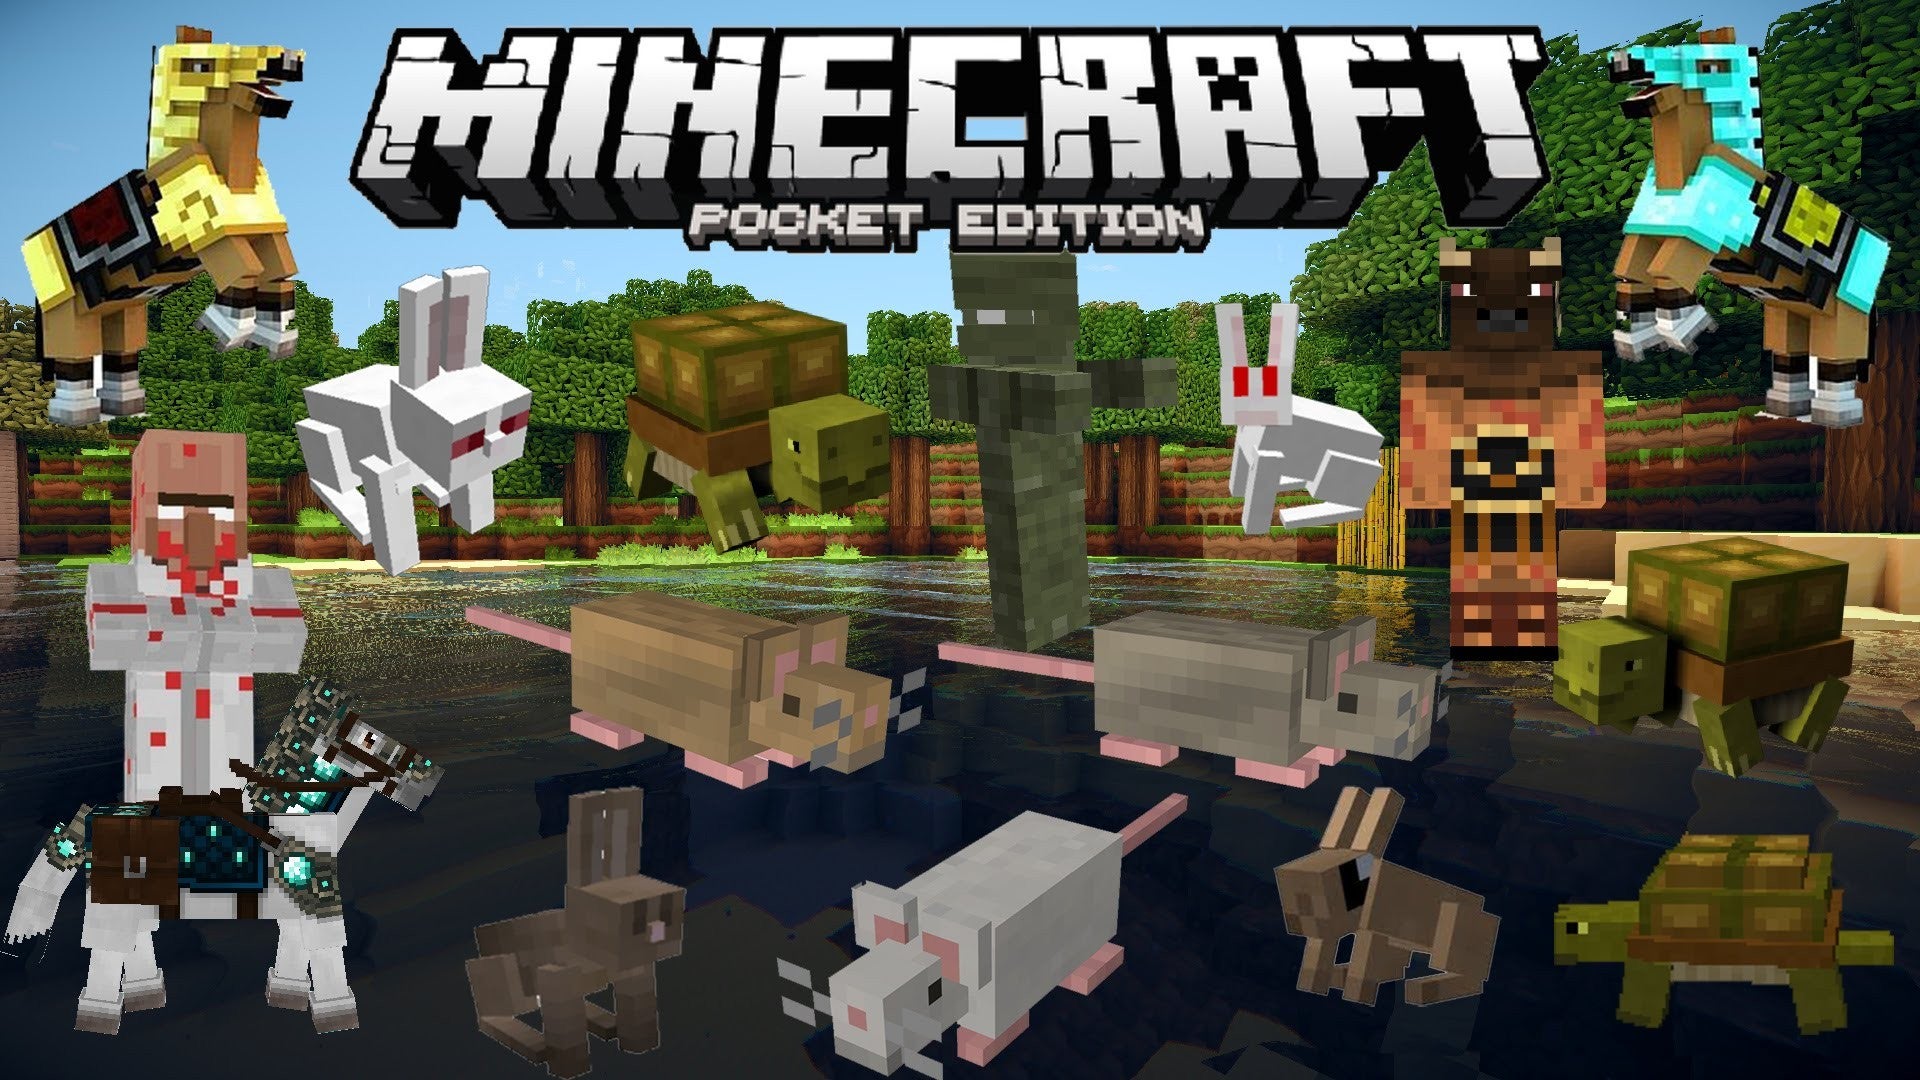 Minecraft: Pocket Edition for Windows Phone won't receive any new updates due to low usage